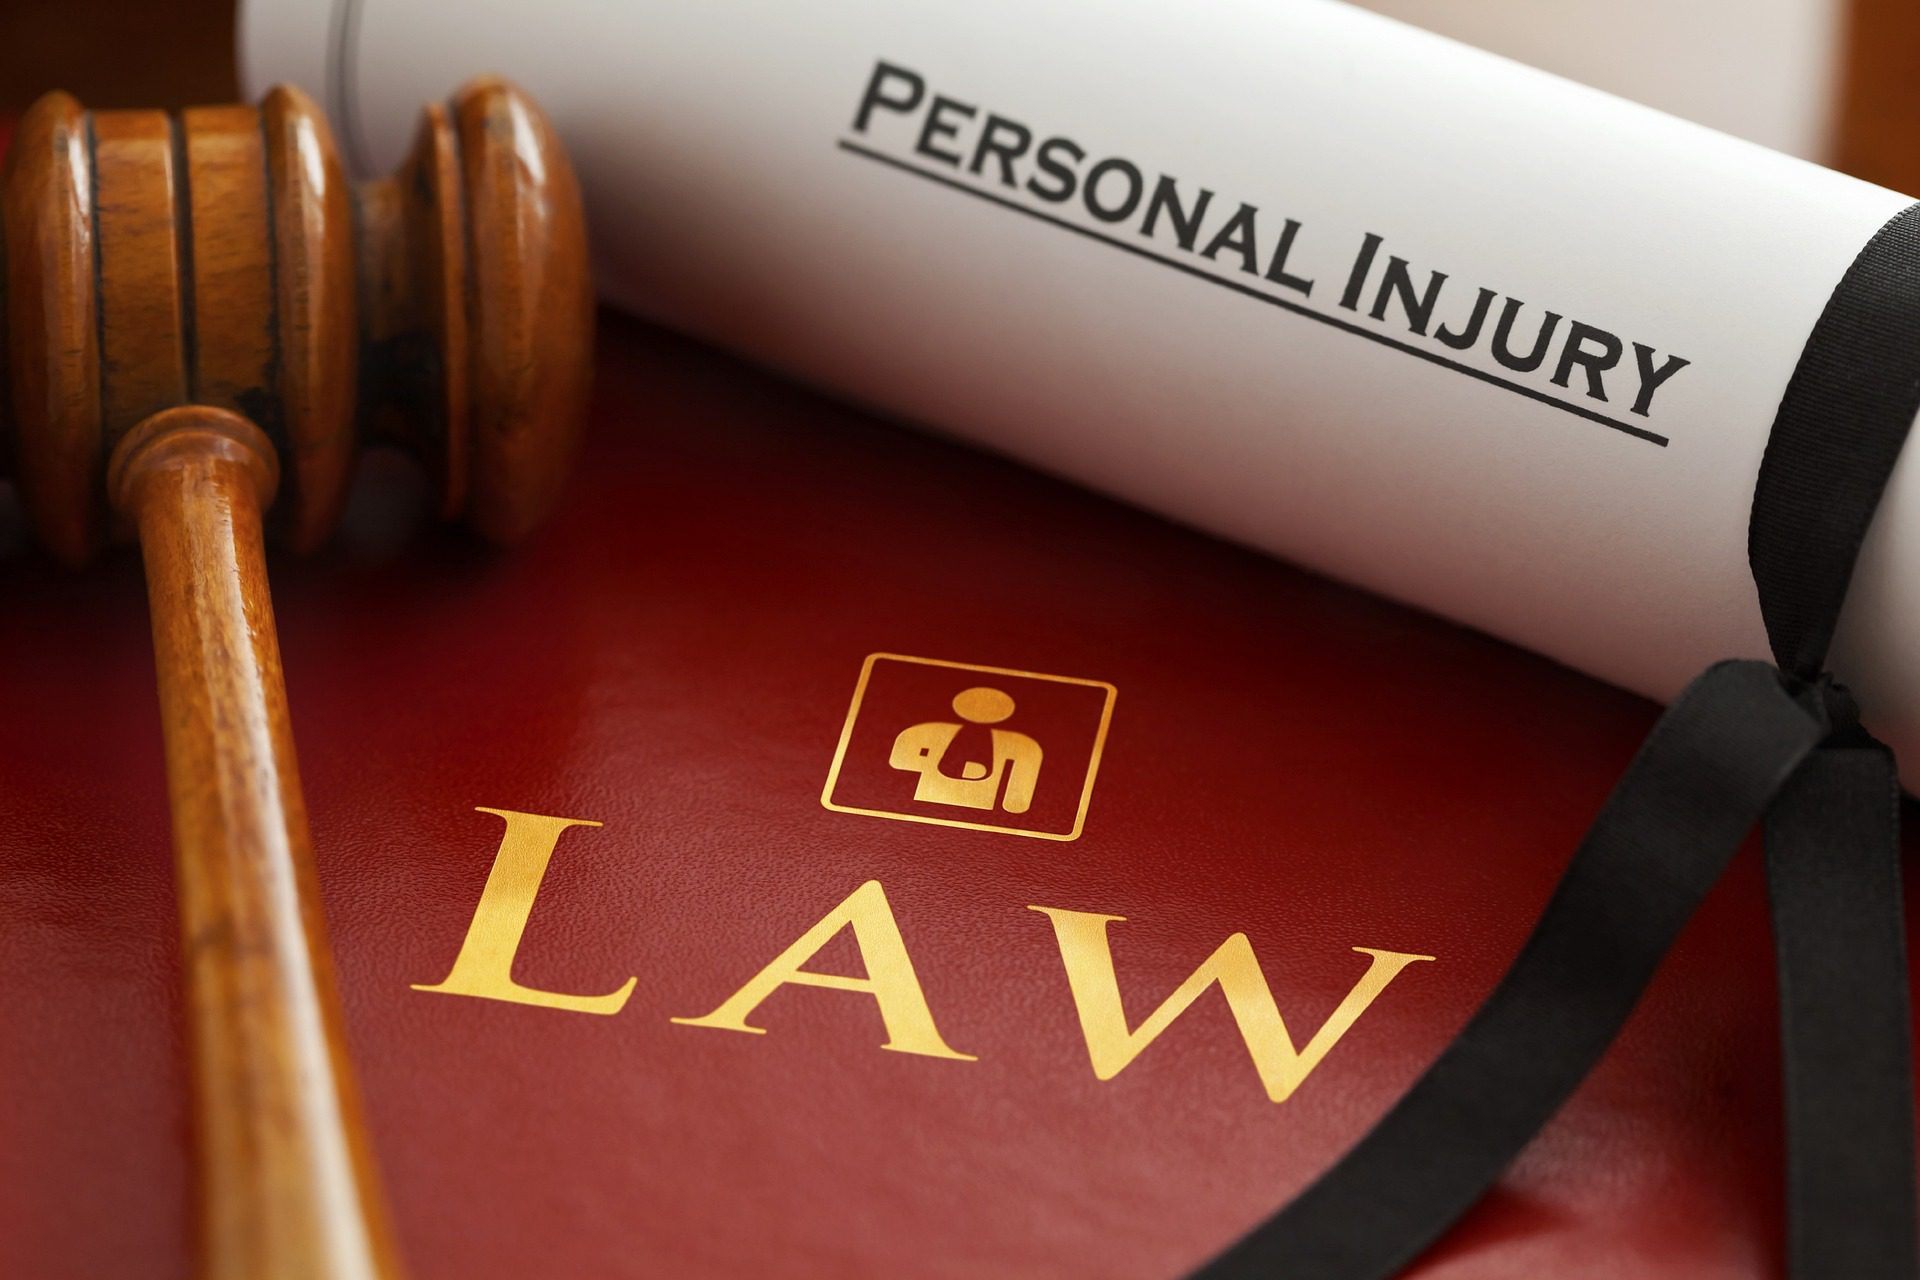 Marketing ideas for personal injury lawyers